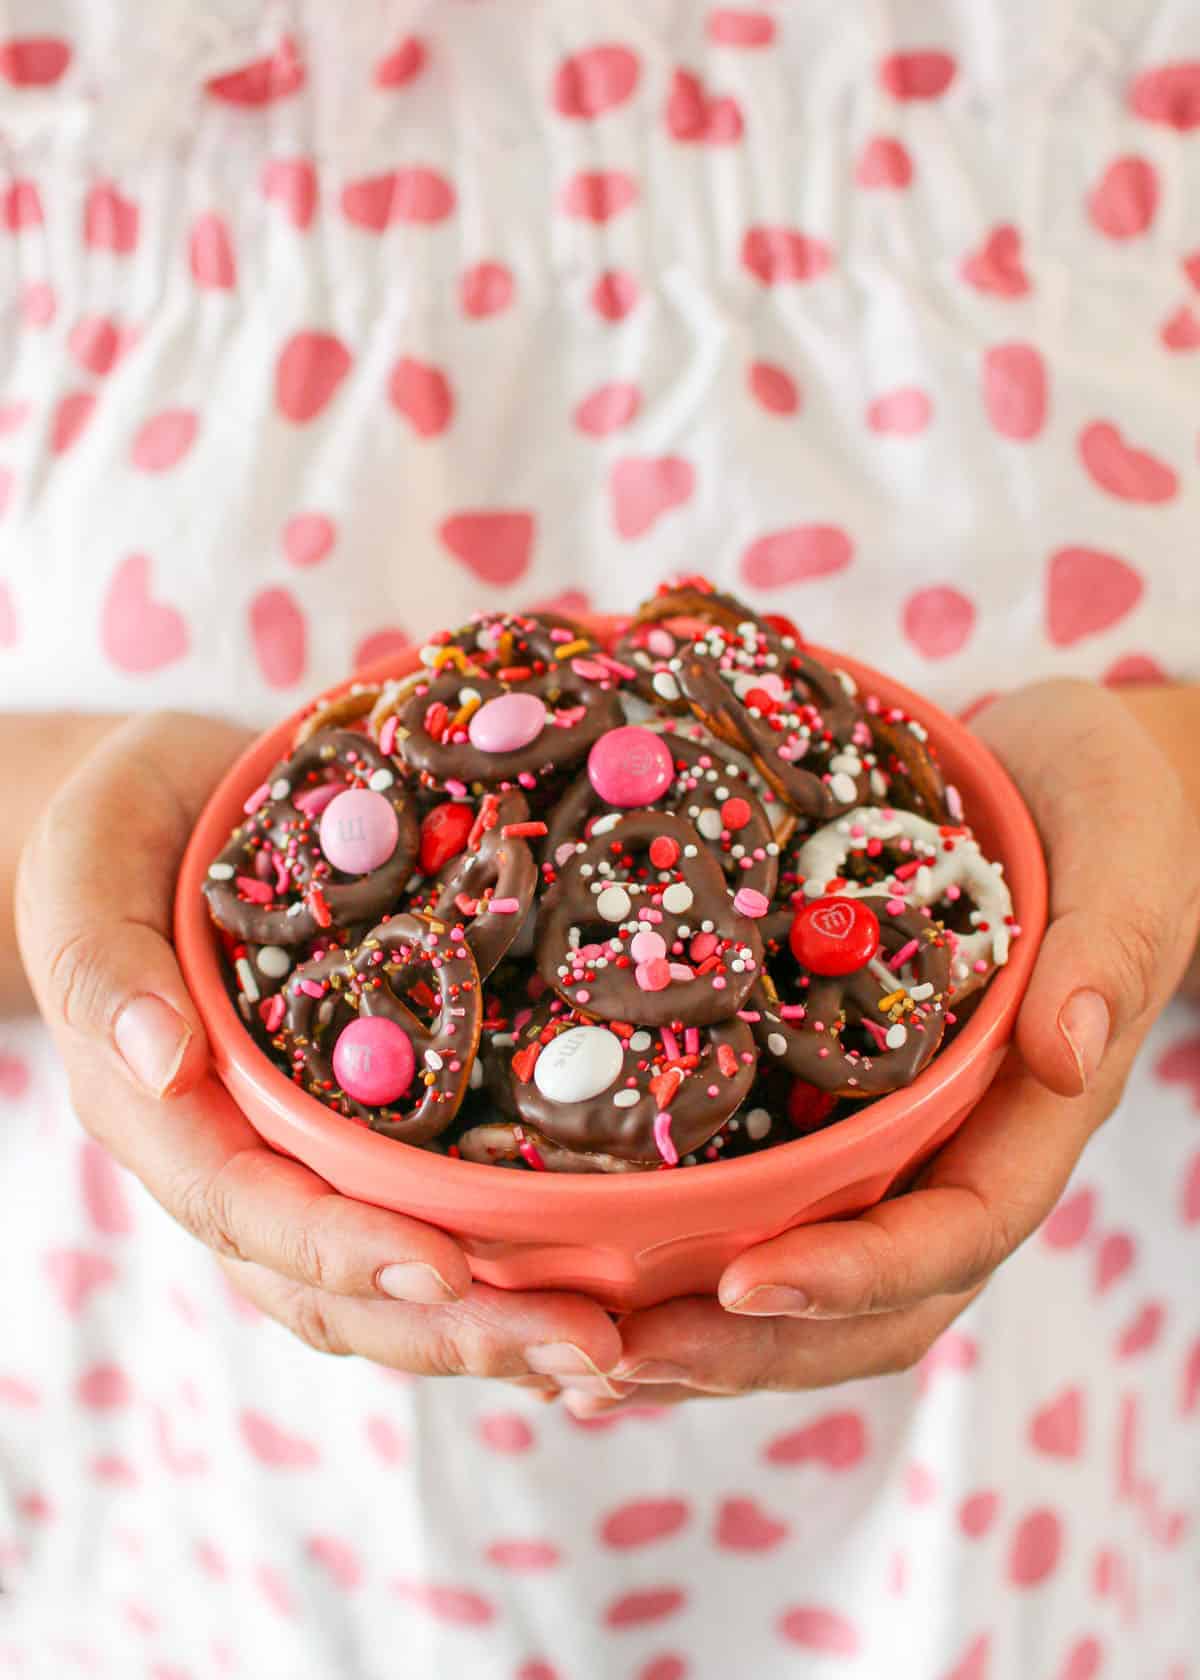 Valentine's Day Chocolate Covered Pretzels in a pink bowl being held by two tan hands. The person is wearing a white shirt with pink pots.